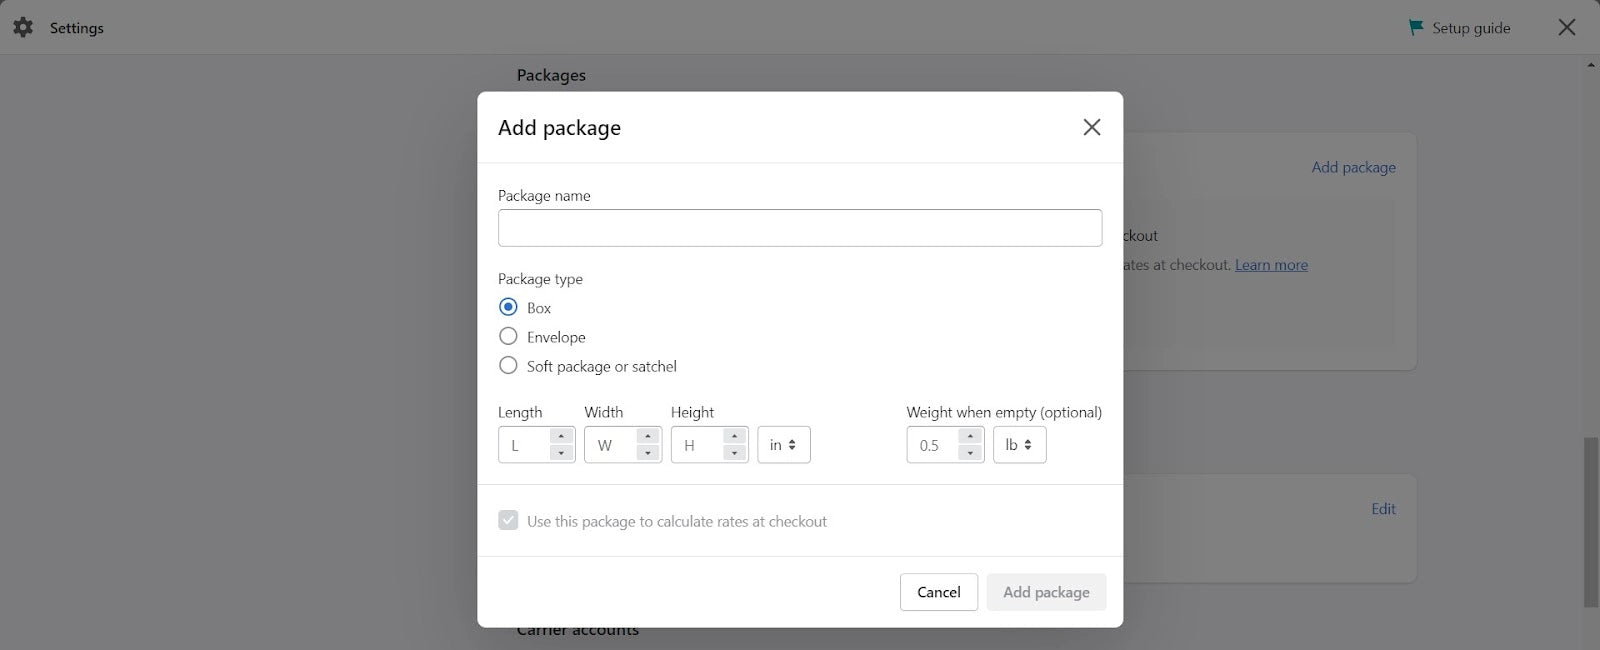 Shopify Shipping and delivery settings - Packages